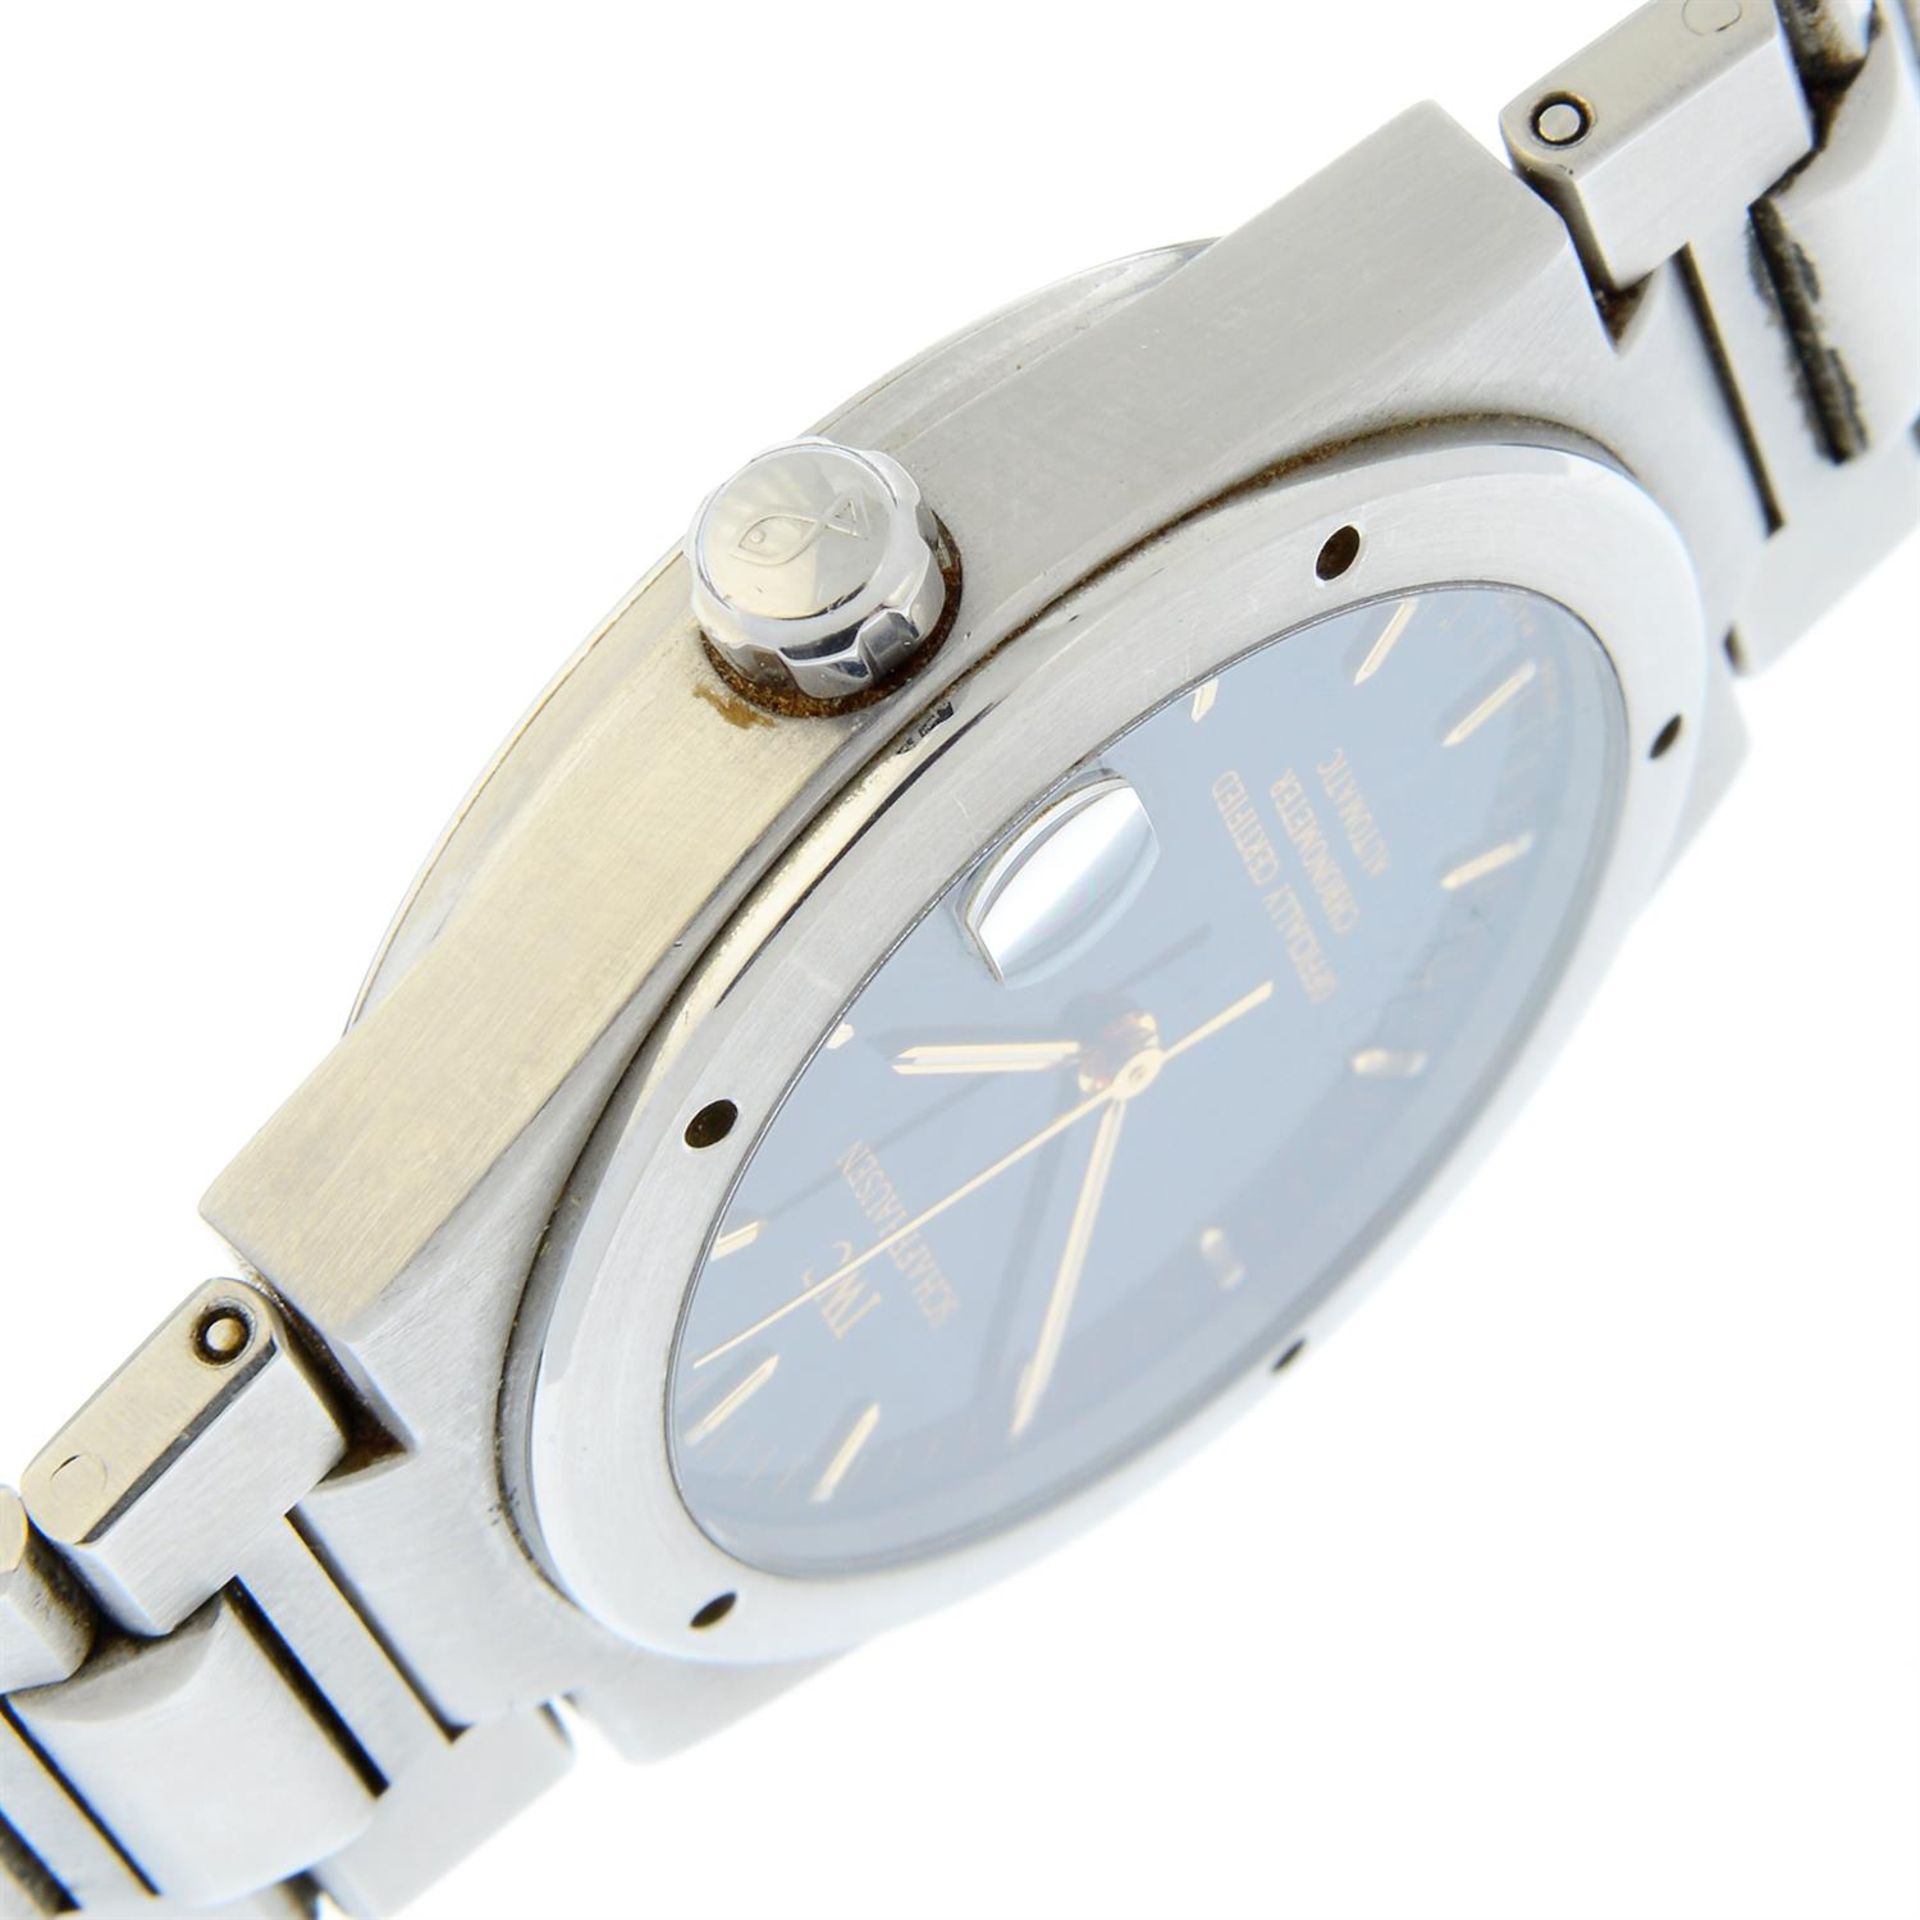 IWC - a stainless steel Ingenieur bracelet watch, 34mm. - Image 3 of 5